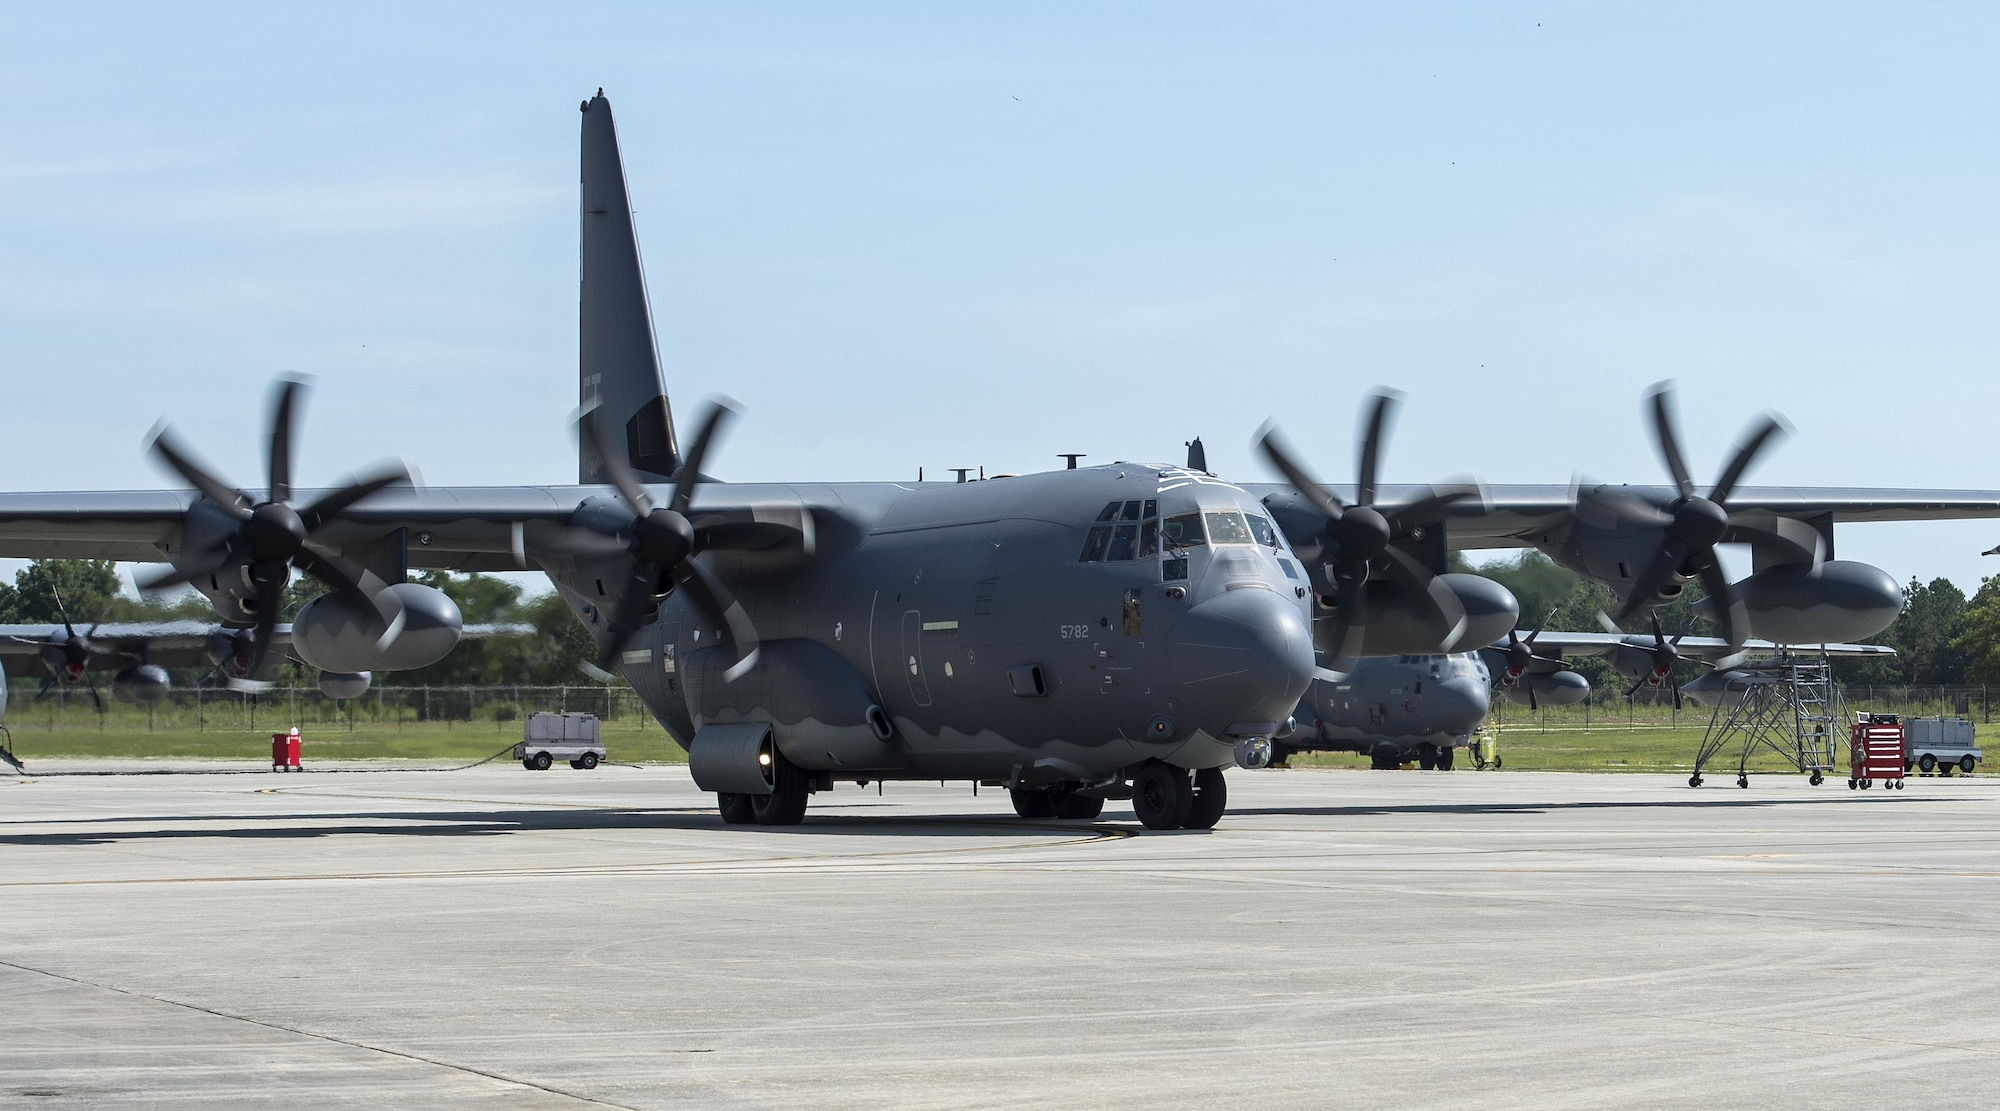 U.S. Air Force Capt. Christy Wise, 71st Rescue Squadron HC-130J Combat King II pilot, finishes a pre-flight check before her requalification flight, July 22, 2016, at Moody Air Force Base, Ga. A boating accident resulted in an above-the-knee amputation of Wise's right leg. (U.S. Air Force photo by Airman 1st Class Janiqua P. Robinson)
